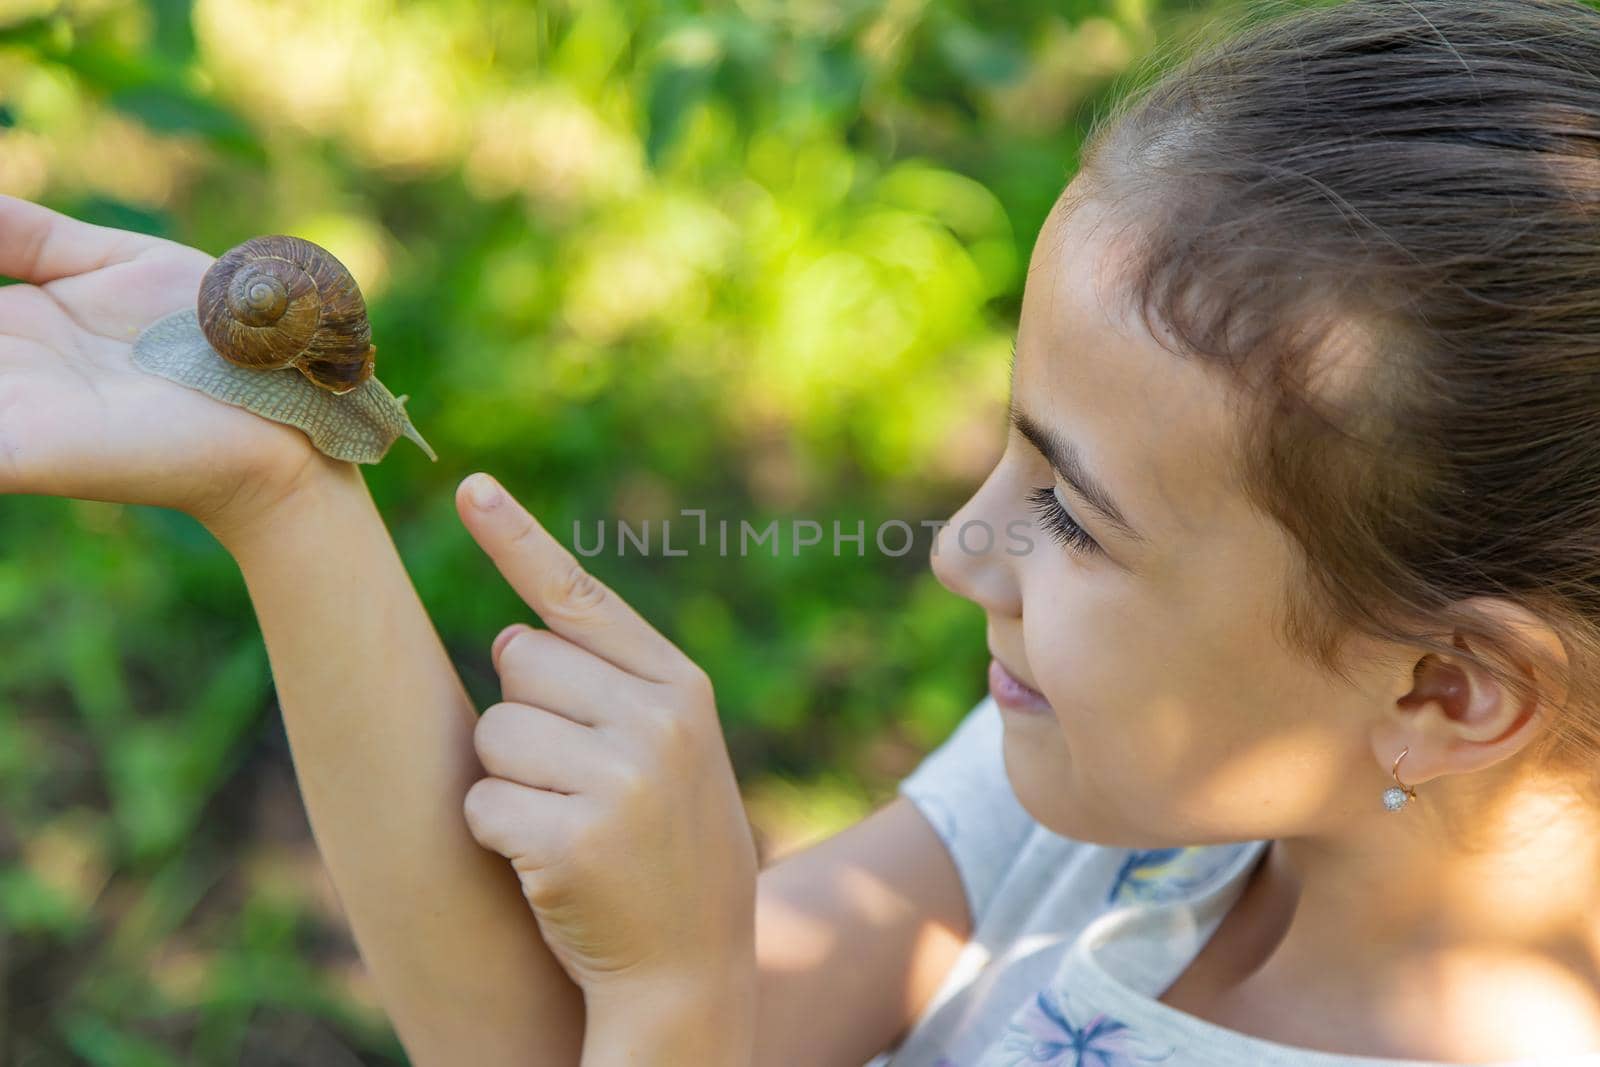 The child examines the snails on the tree. Selective focus. by yanadjana